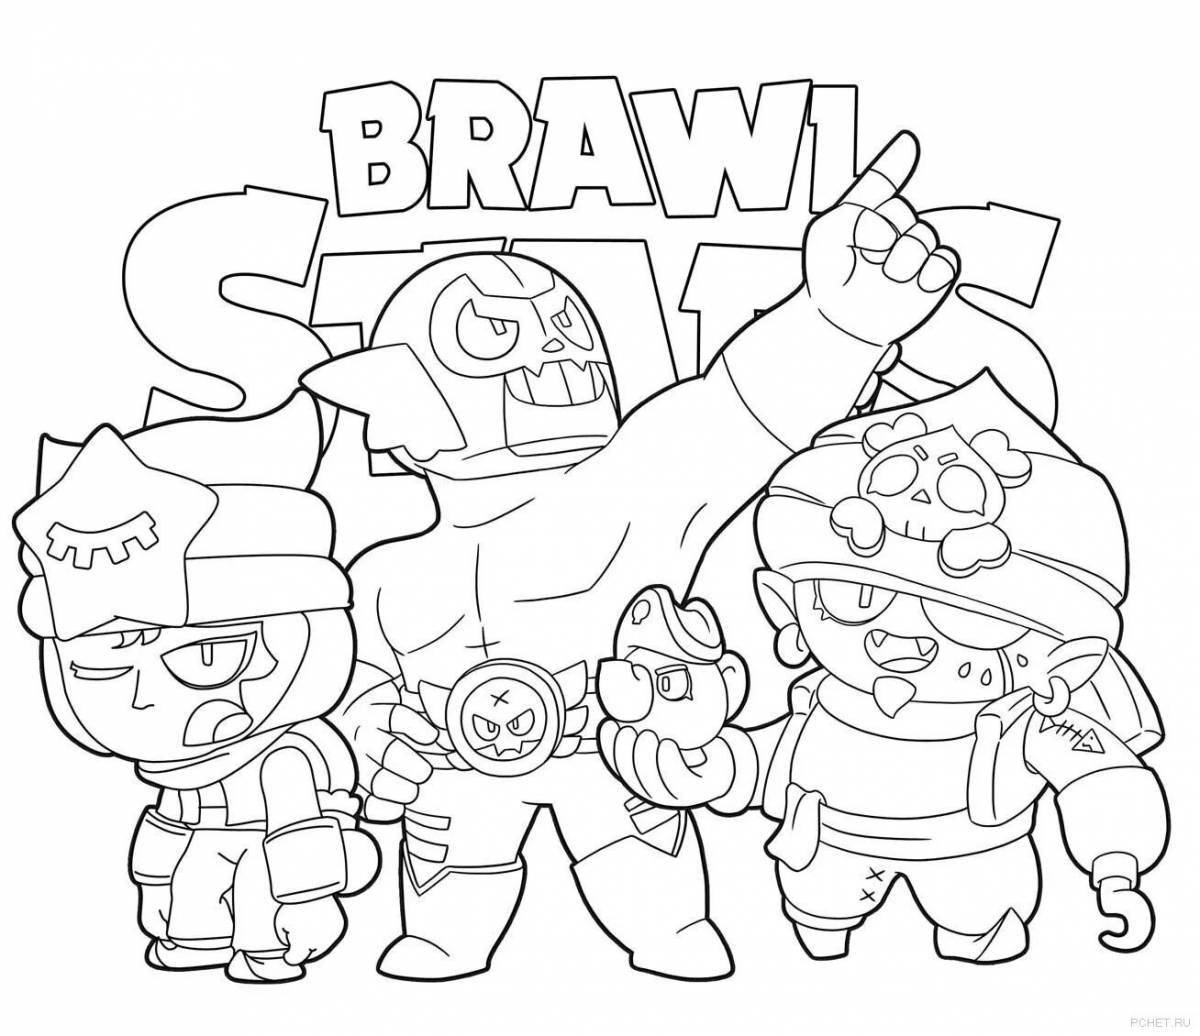 Coloring book with cute bravo stars stickers